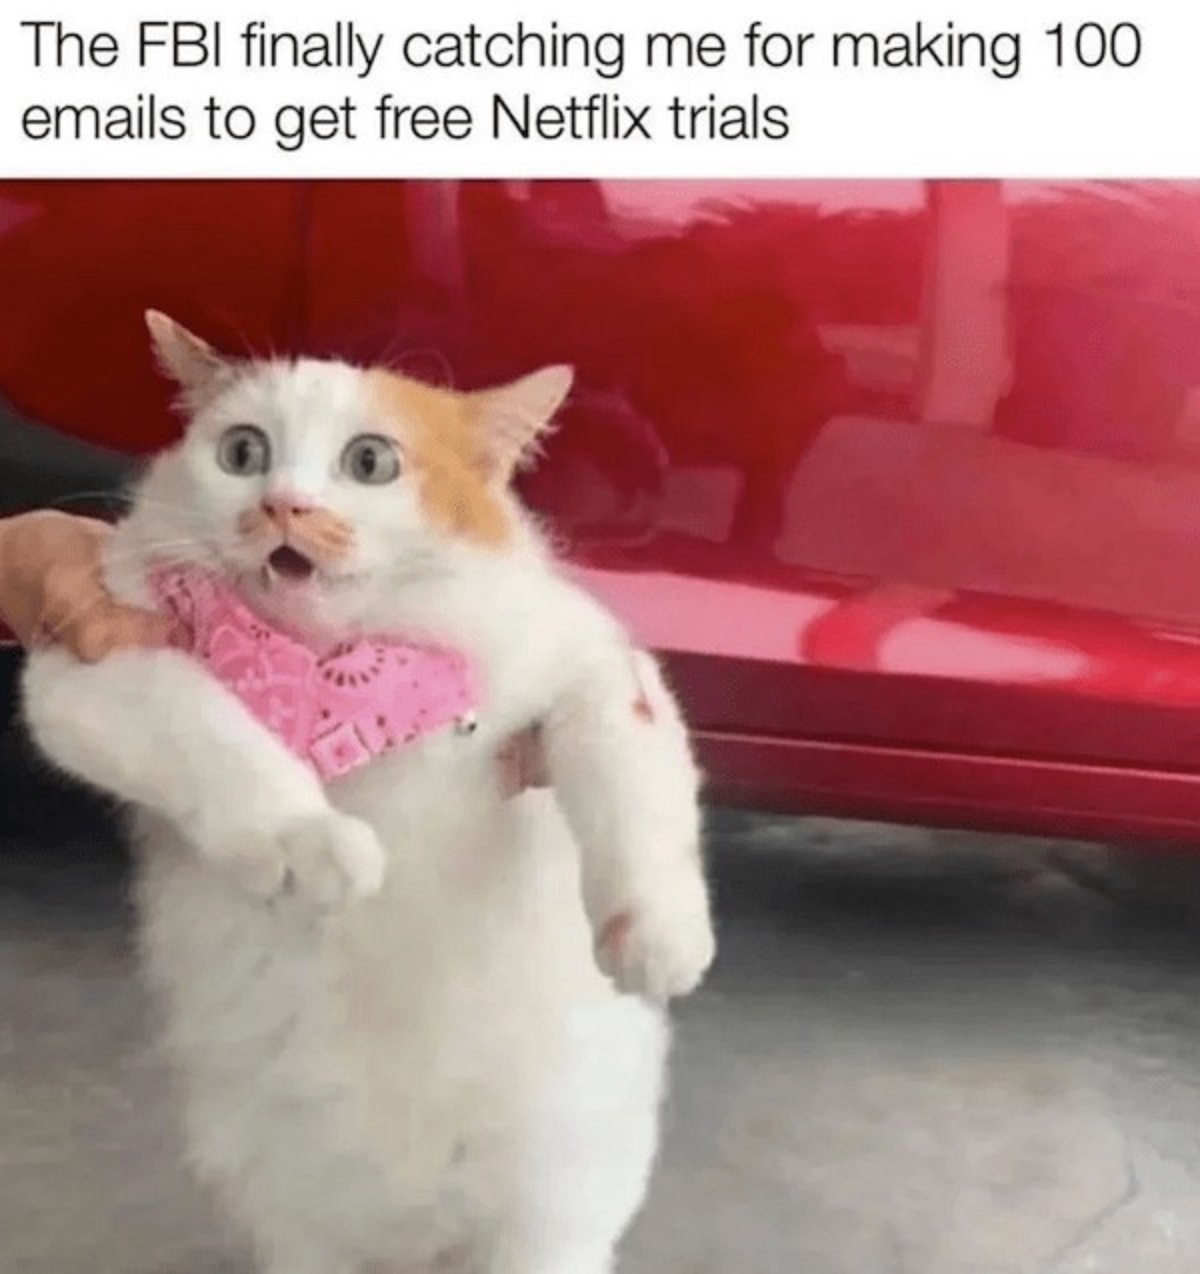 kitten - The Fbi finally catching me for making 100 emails to get free Netflix trials